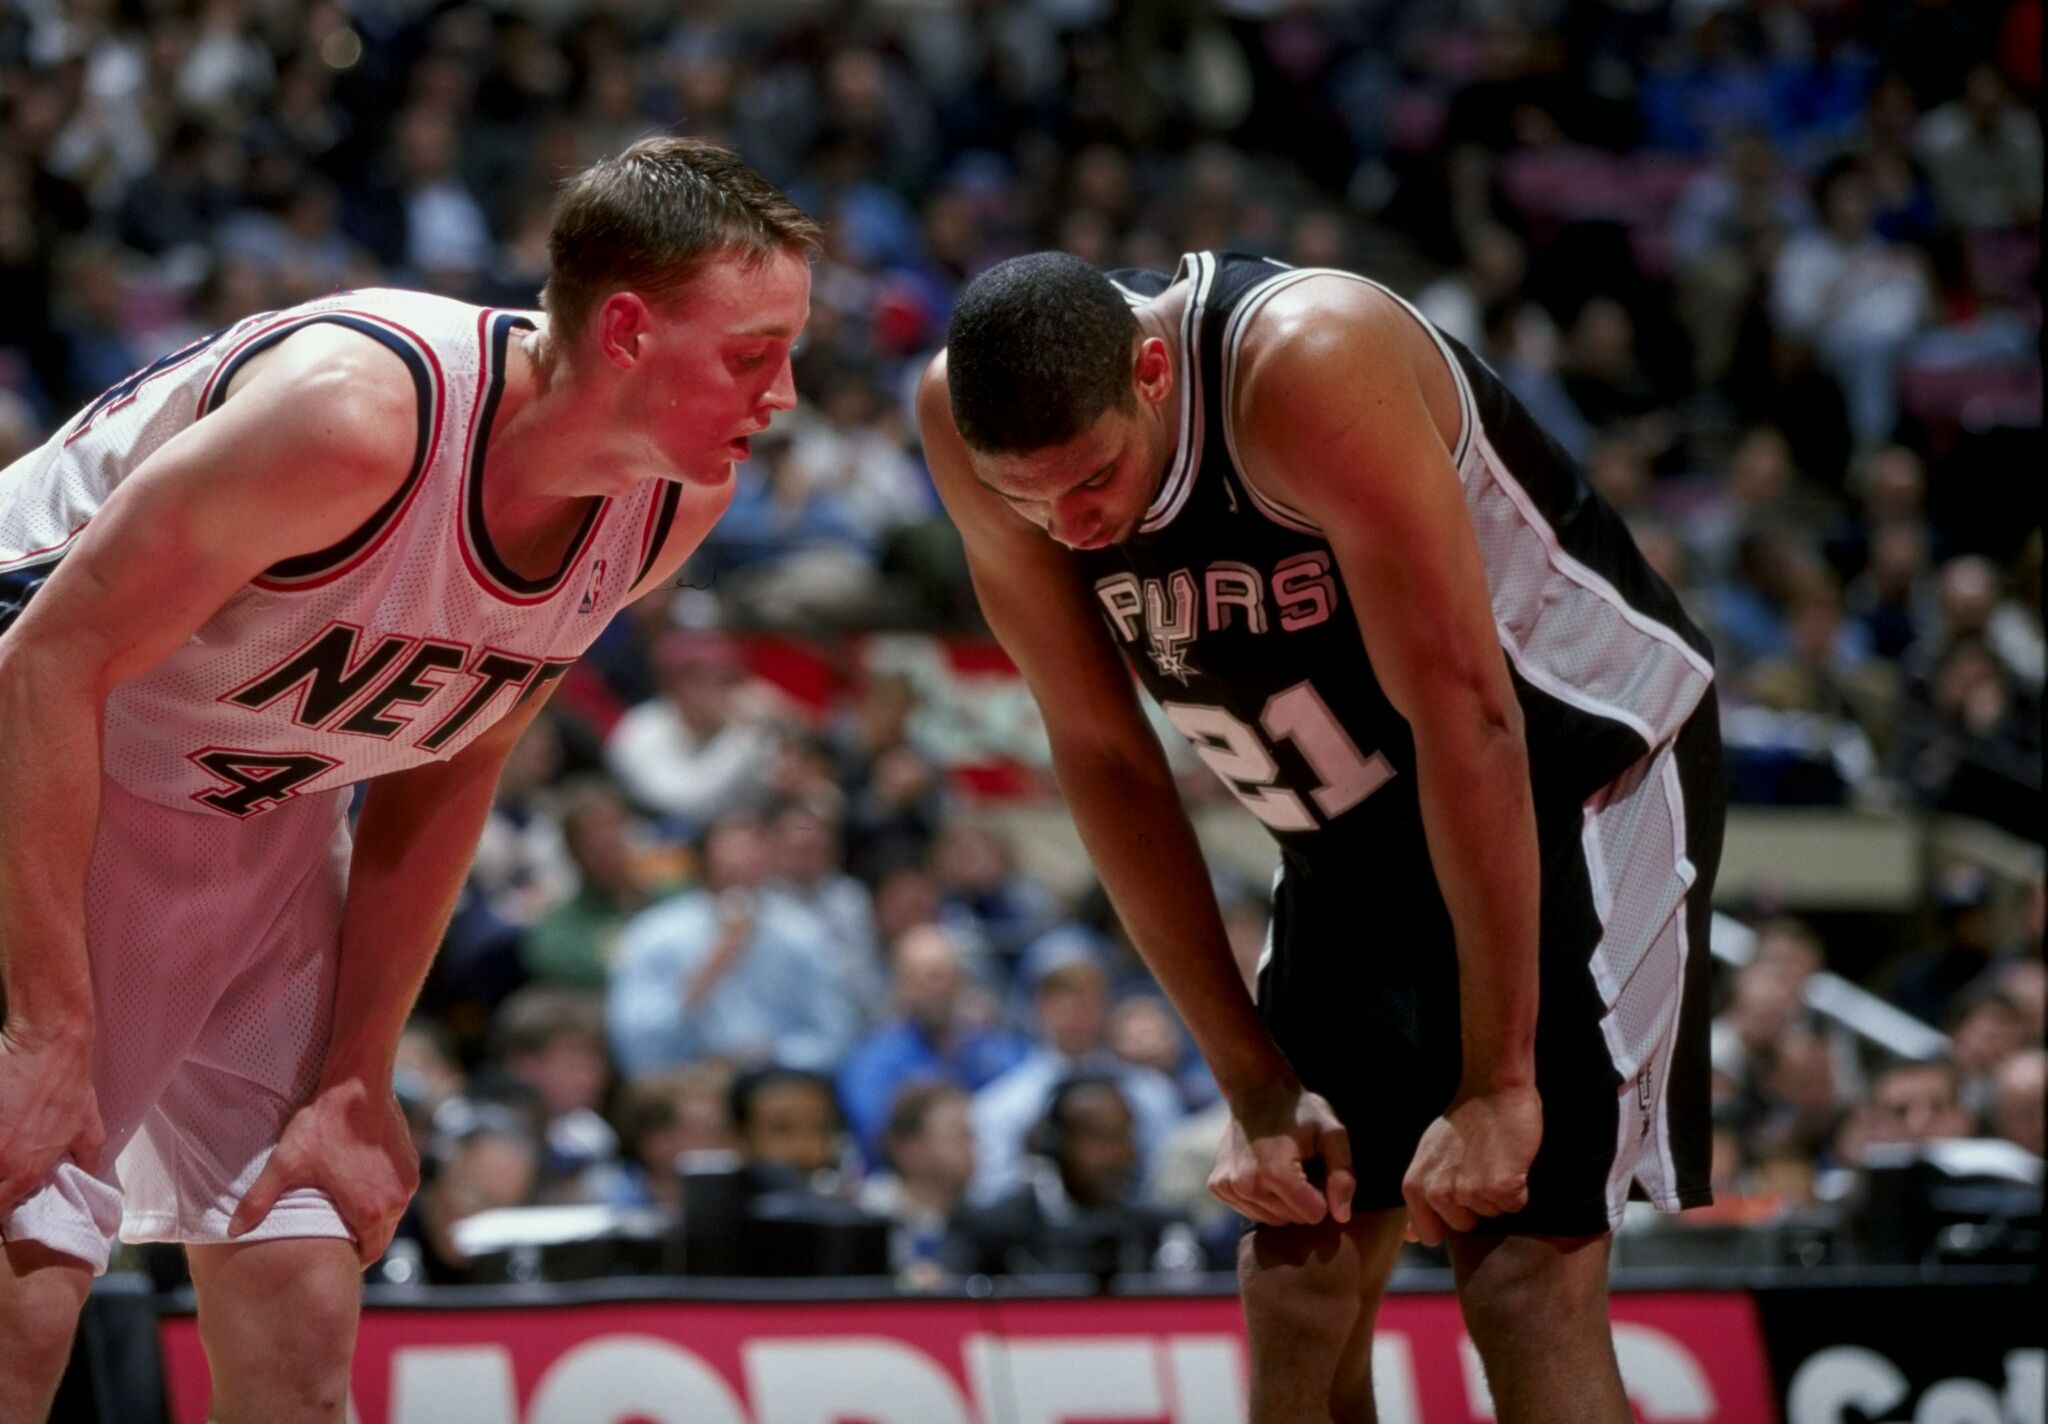 Home - Keith Van Horn Official Fan Page